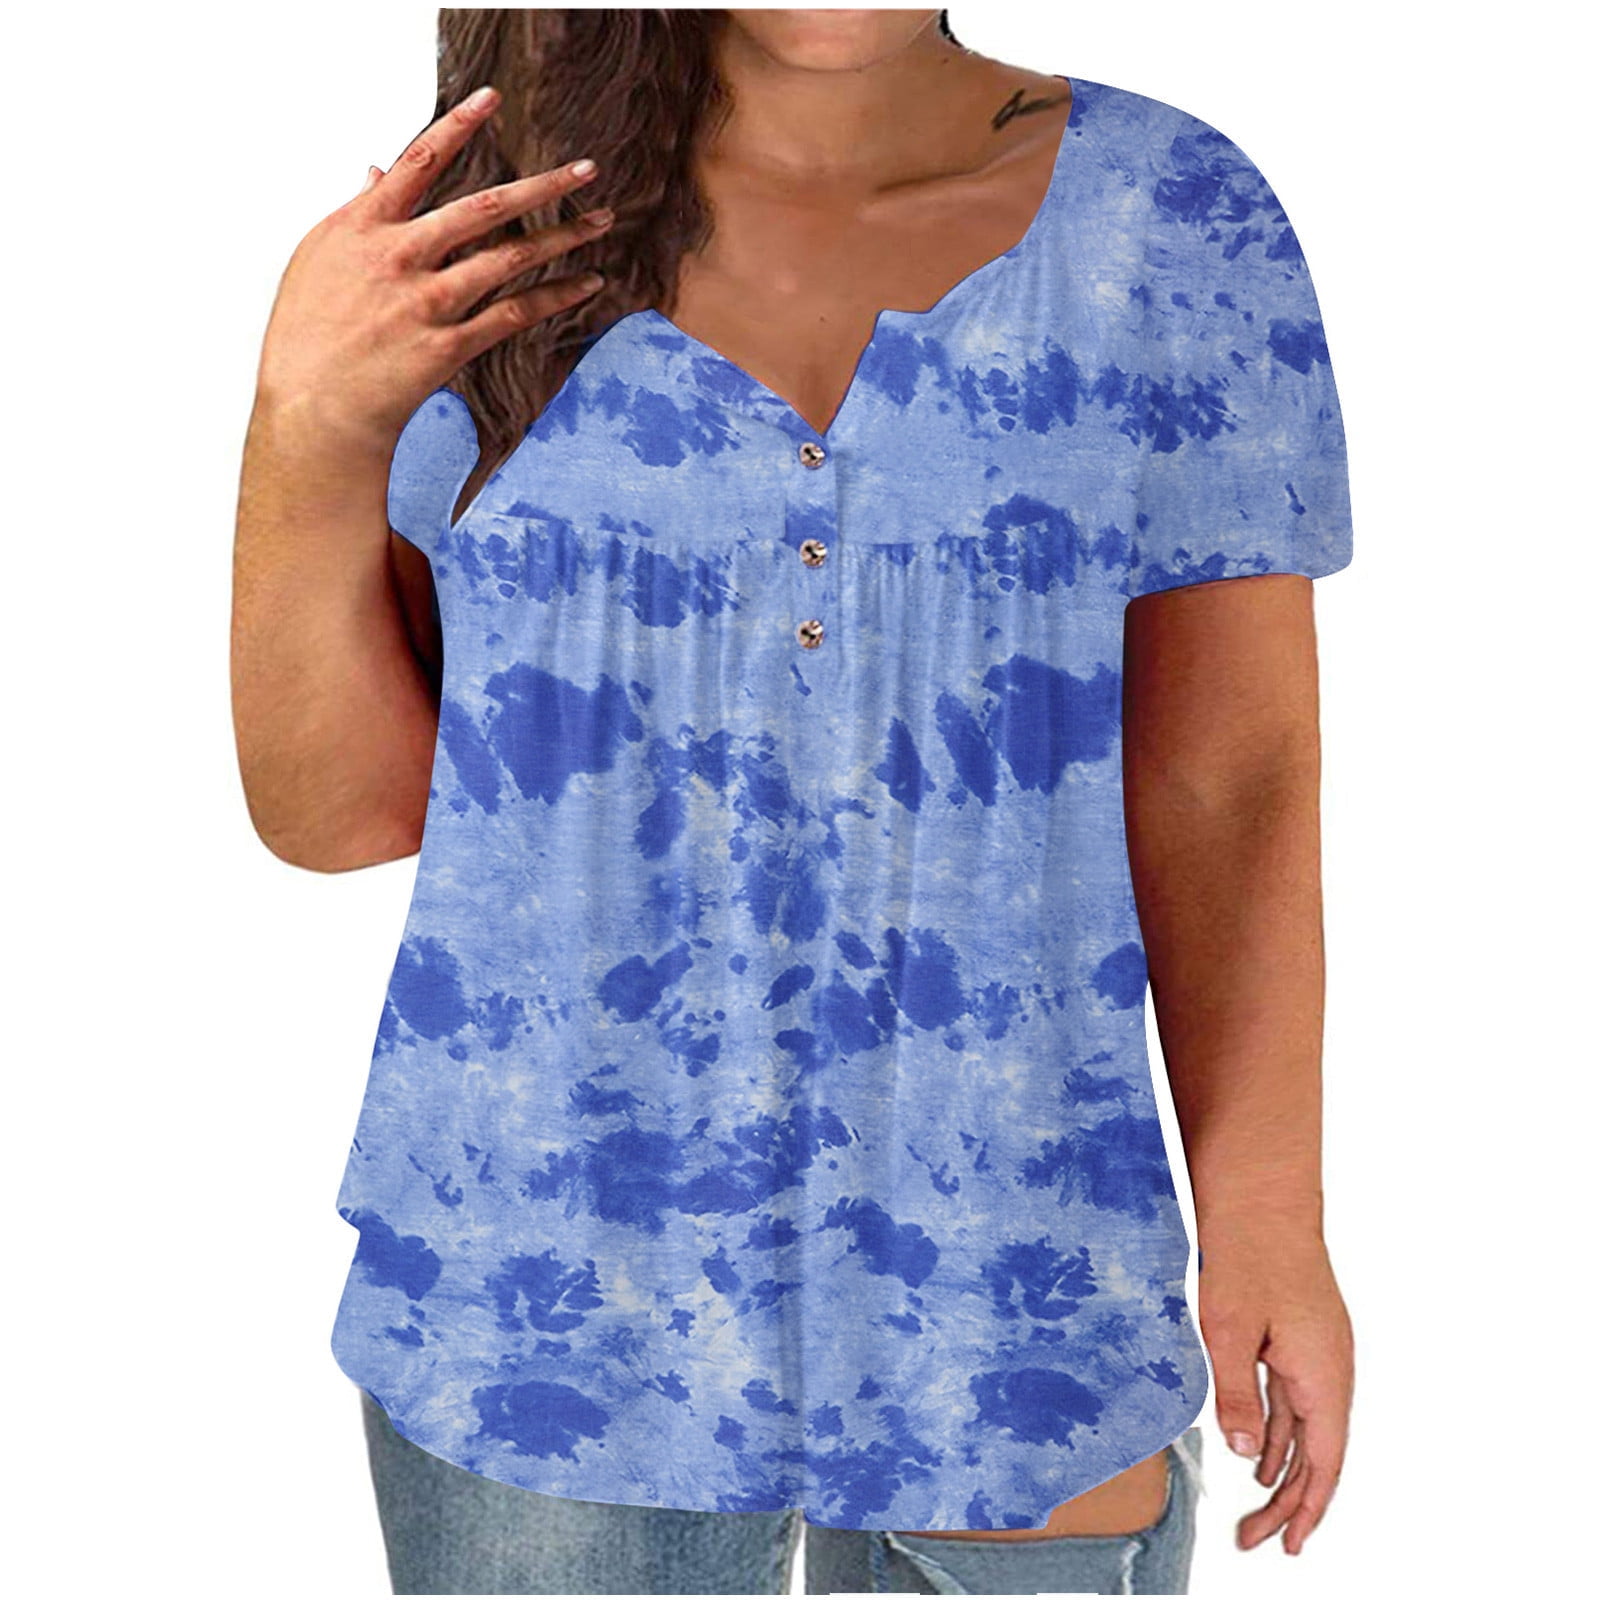 womens tops clearance under $5 LAWOR Tops For Women Women Plus Size V-Neck  Tie-Dye Print Button Short Sleeve Tops T-Shirt Blouse 